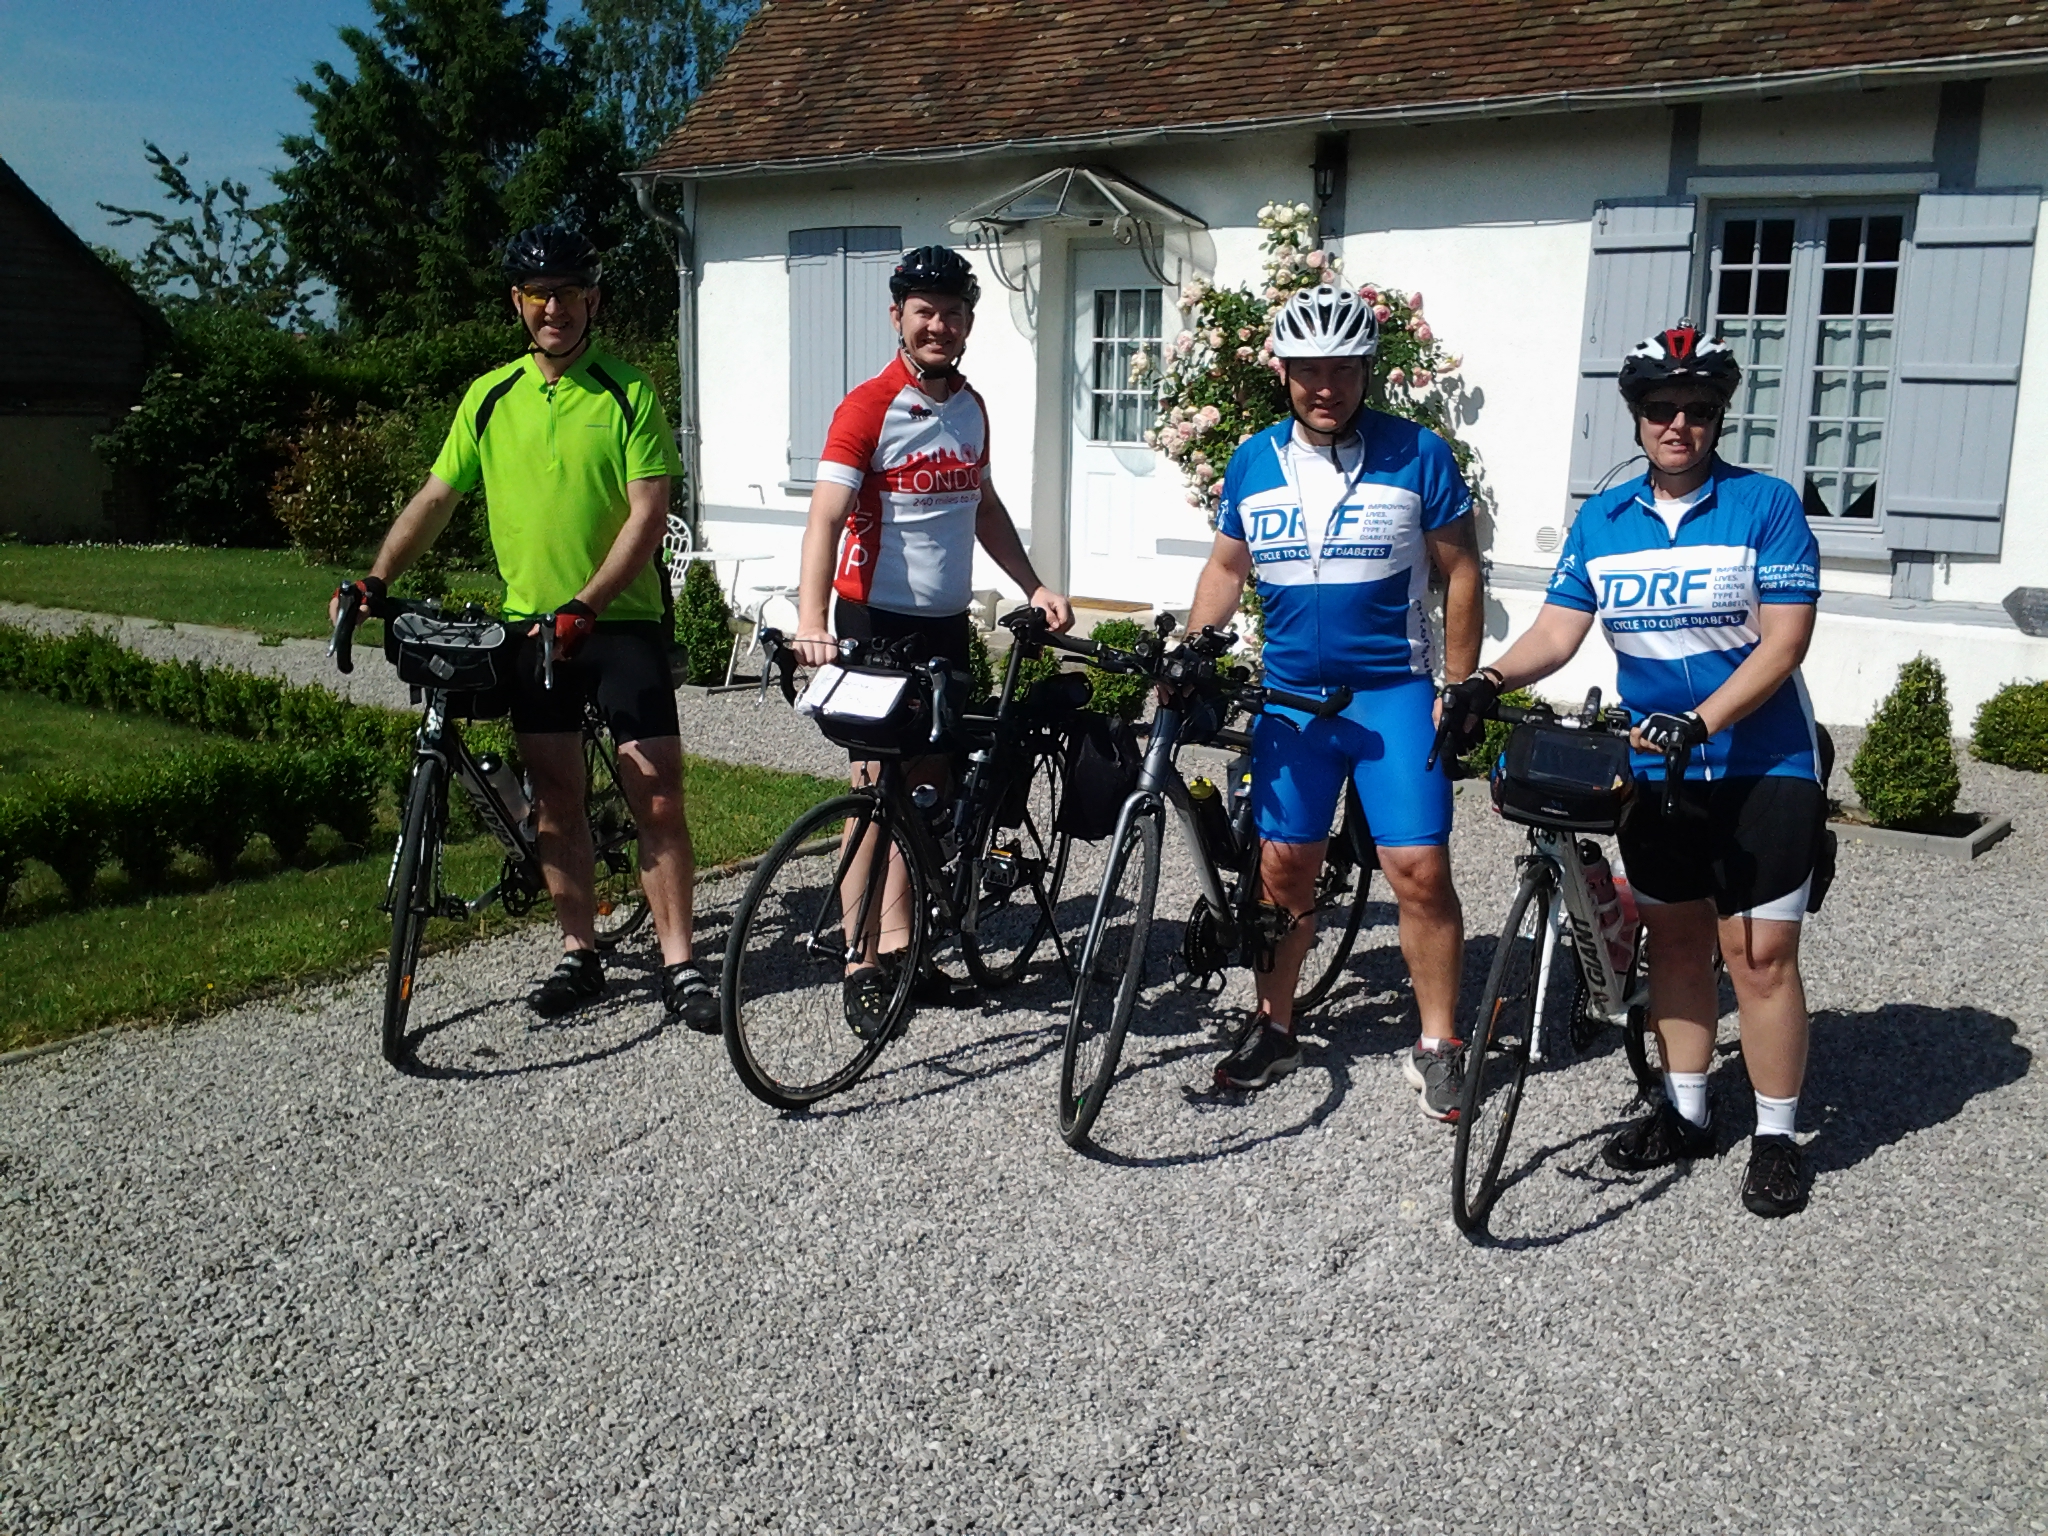 Group shot just before leaving for Day 3's cycle ride to Triel-sur-Seine